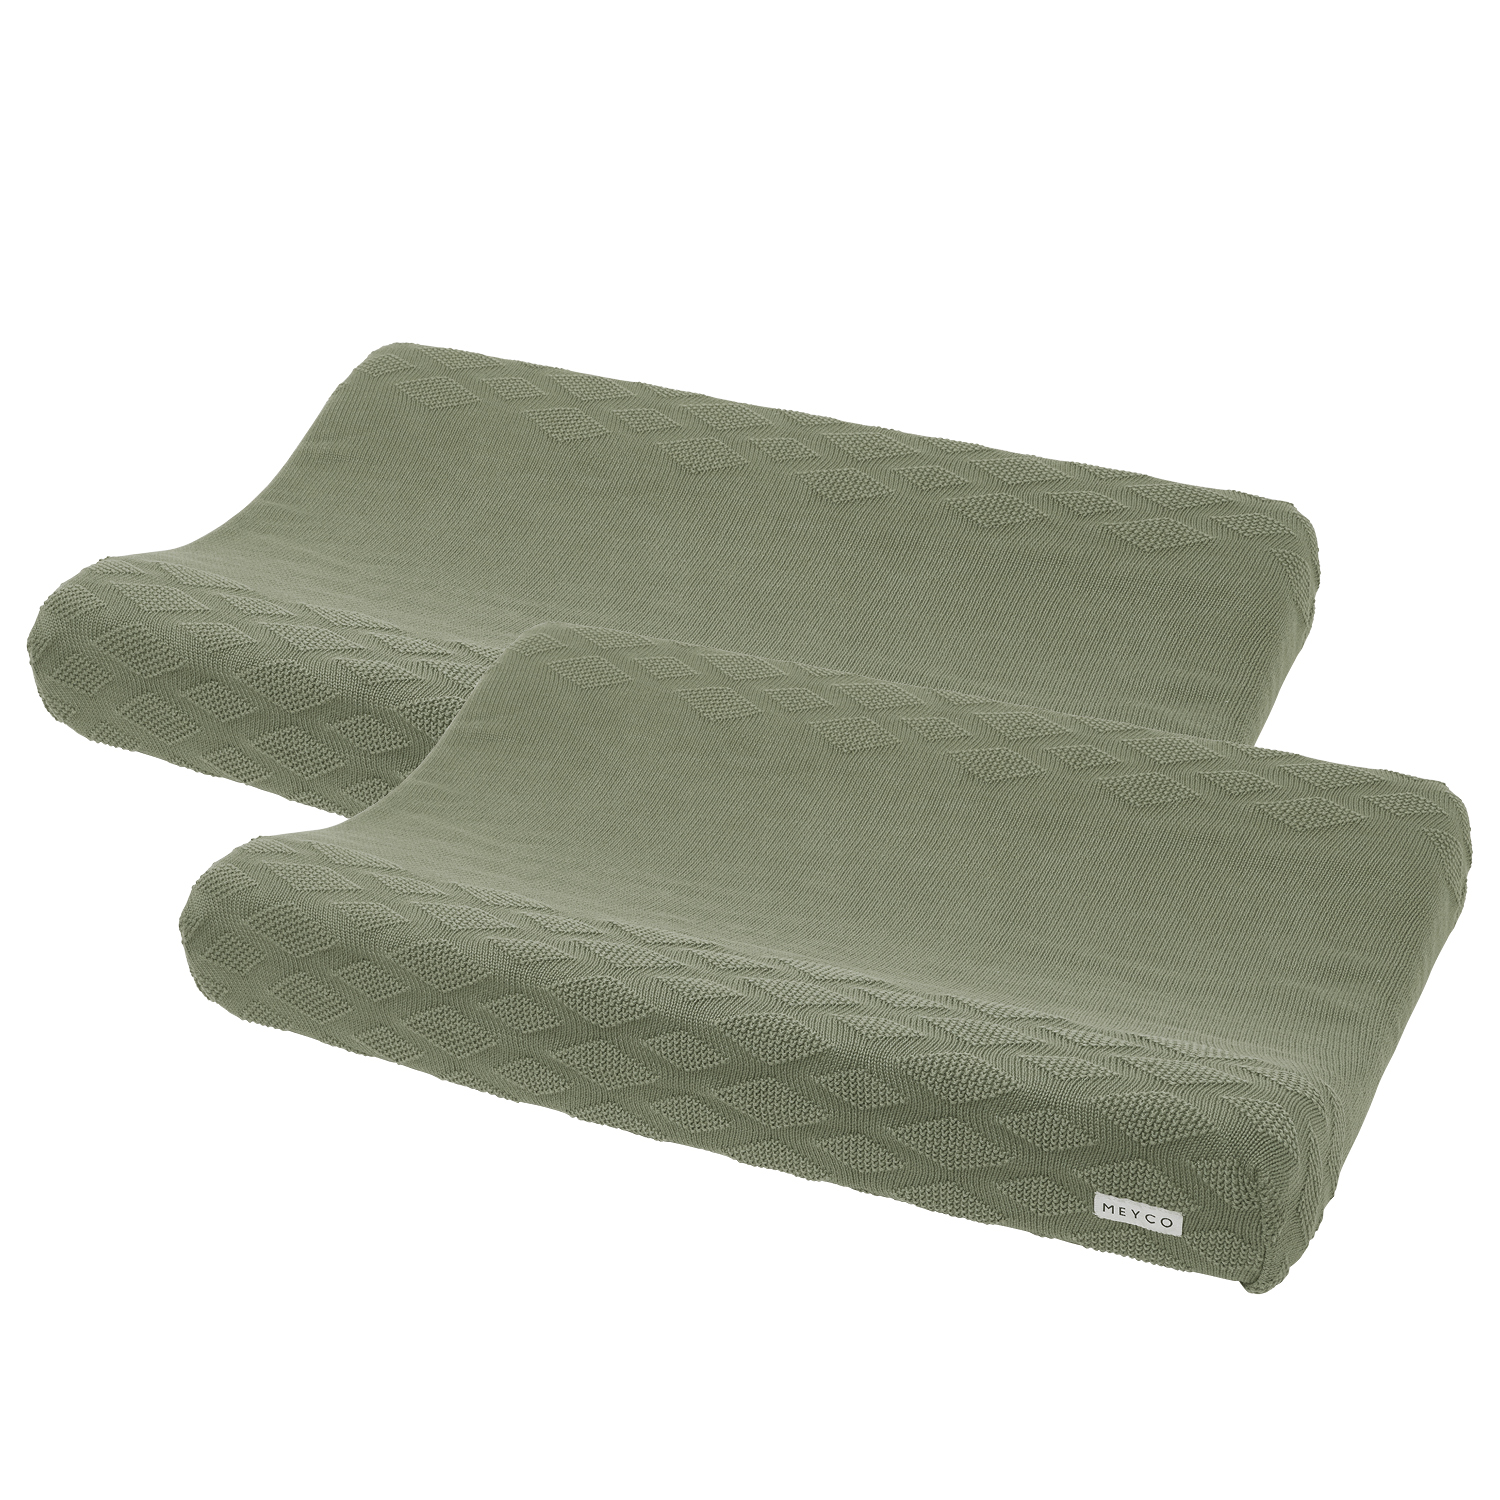 Changing mat cover 2-pack biological Diamond - forest green - 50x70cm